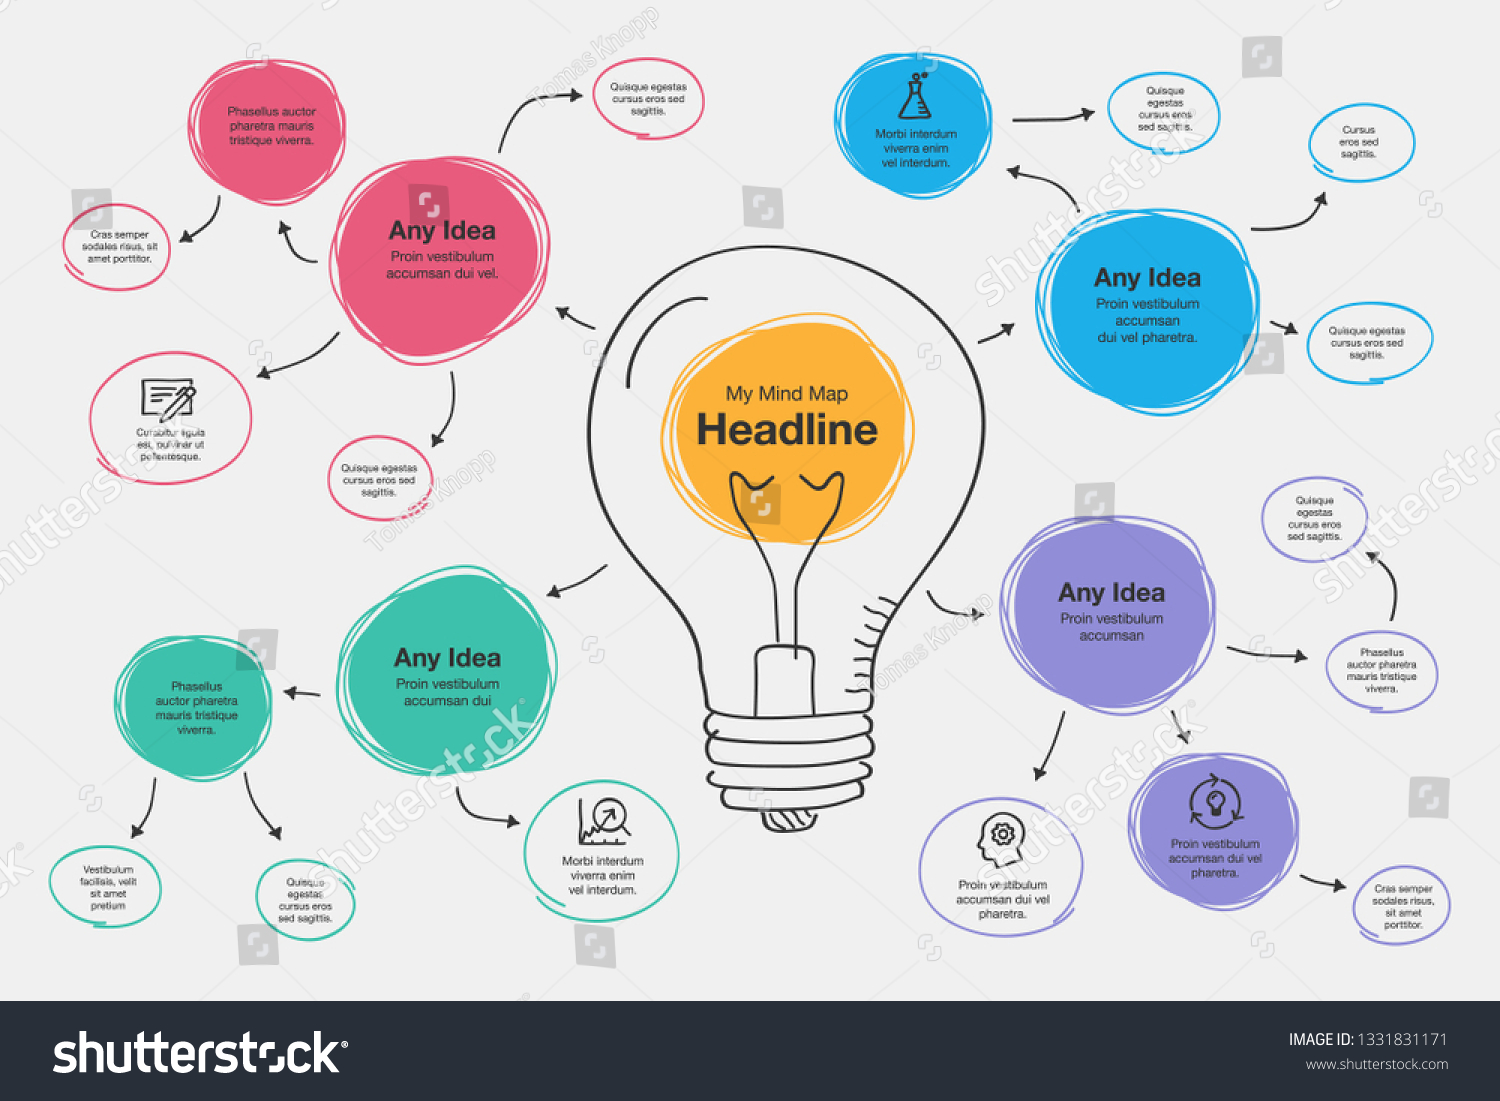 Hand drawn infographic for mind map - Royalty Free Stock Vector ...